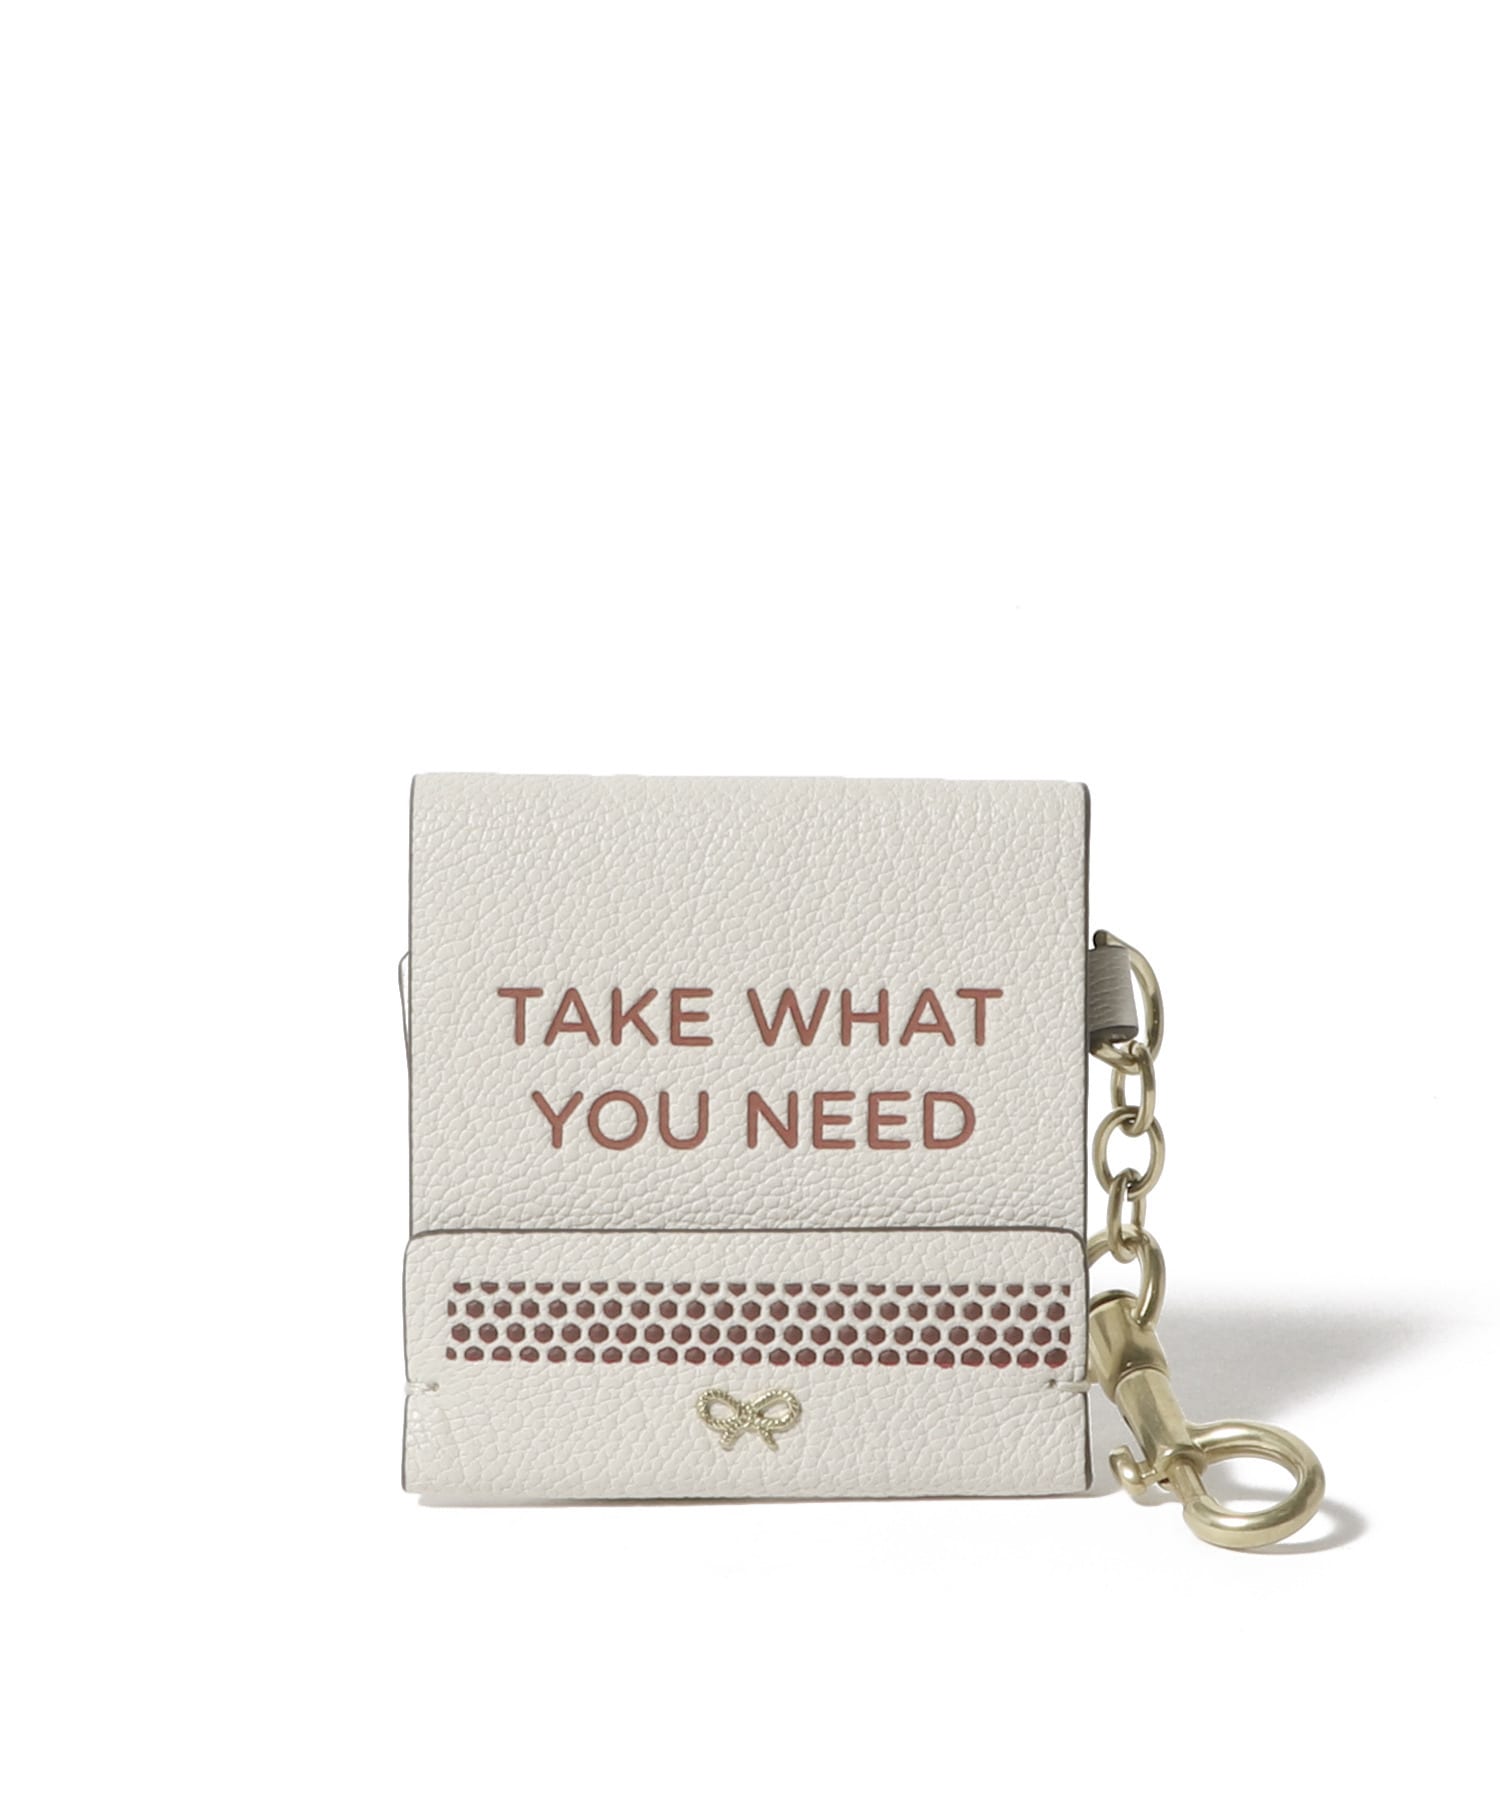 ANYA HINDMARCH / TAKE WHAT YOU NEED バッグチャーム